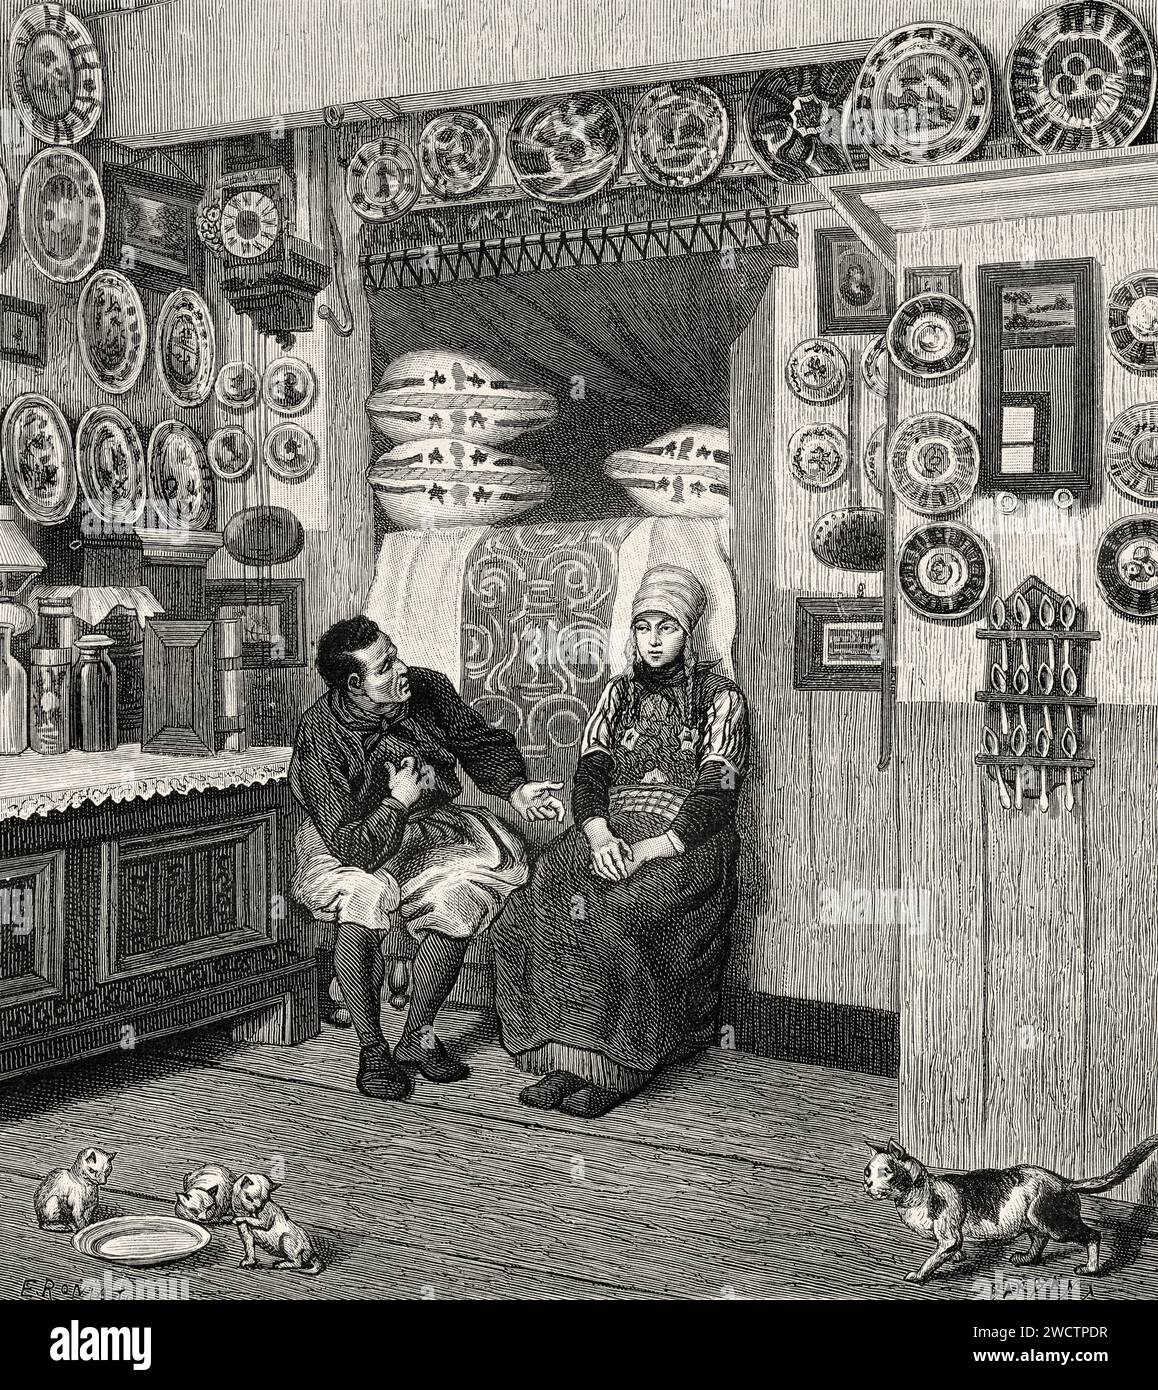 Man and woman inside a traditional house in Marken, Zuiderzee , Holland. Europe. Netherlands 1878 by Charles de Coster (1827 - 1879) Old 19th century engraving from Le Tour du Monde 1880 Stock Photo